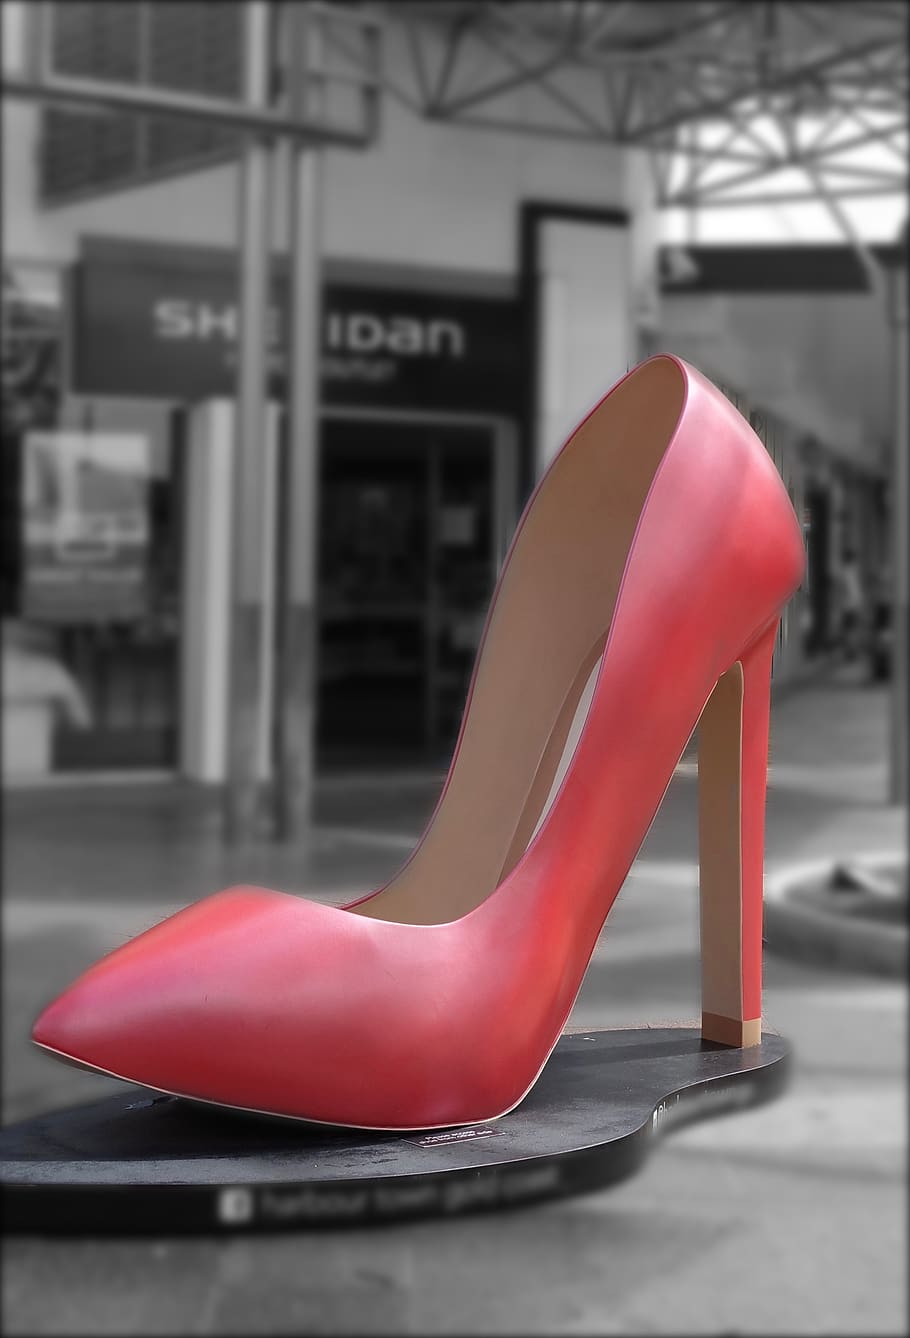 Premium Photo | A pair of high heeled shoes with one that says'i love you '